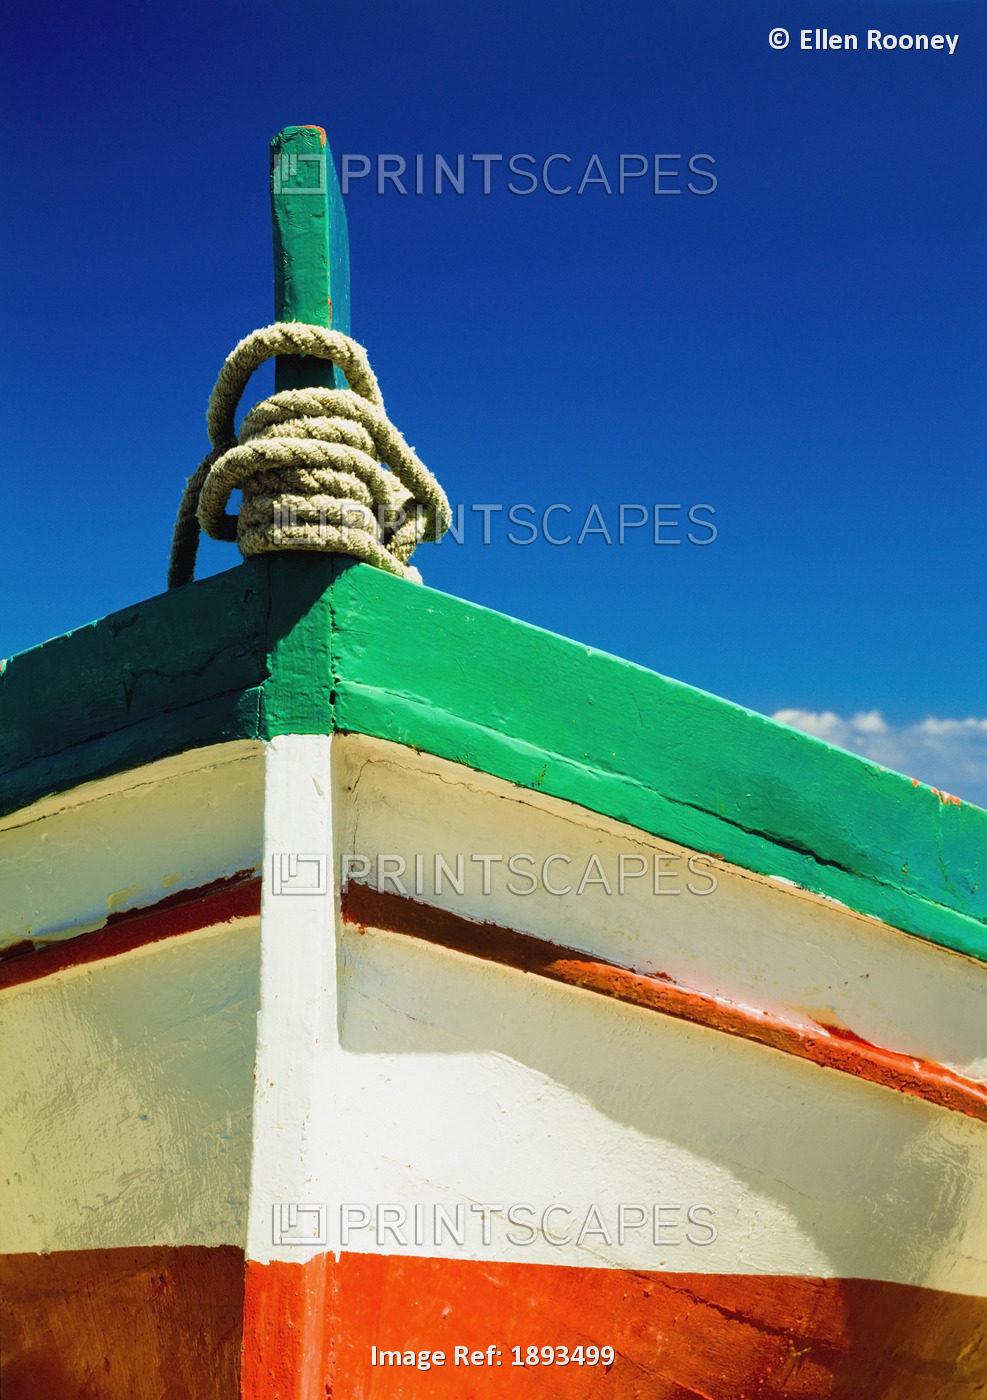 Close Up Of Bow Of Fishing Boat Painted With Italian Colors